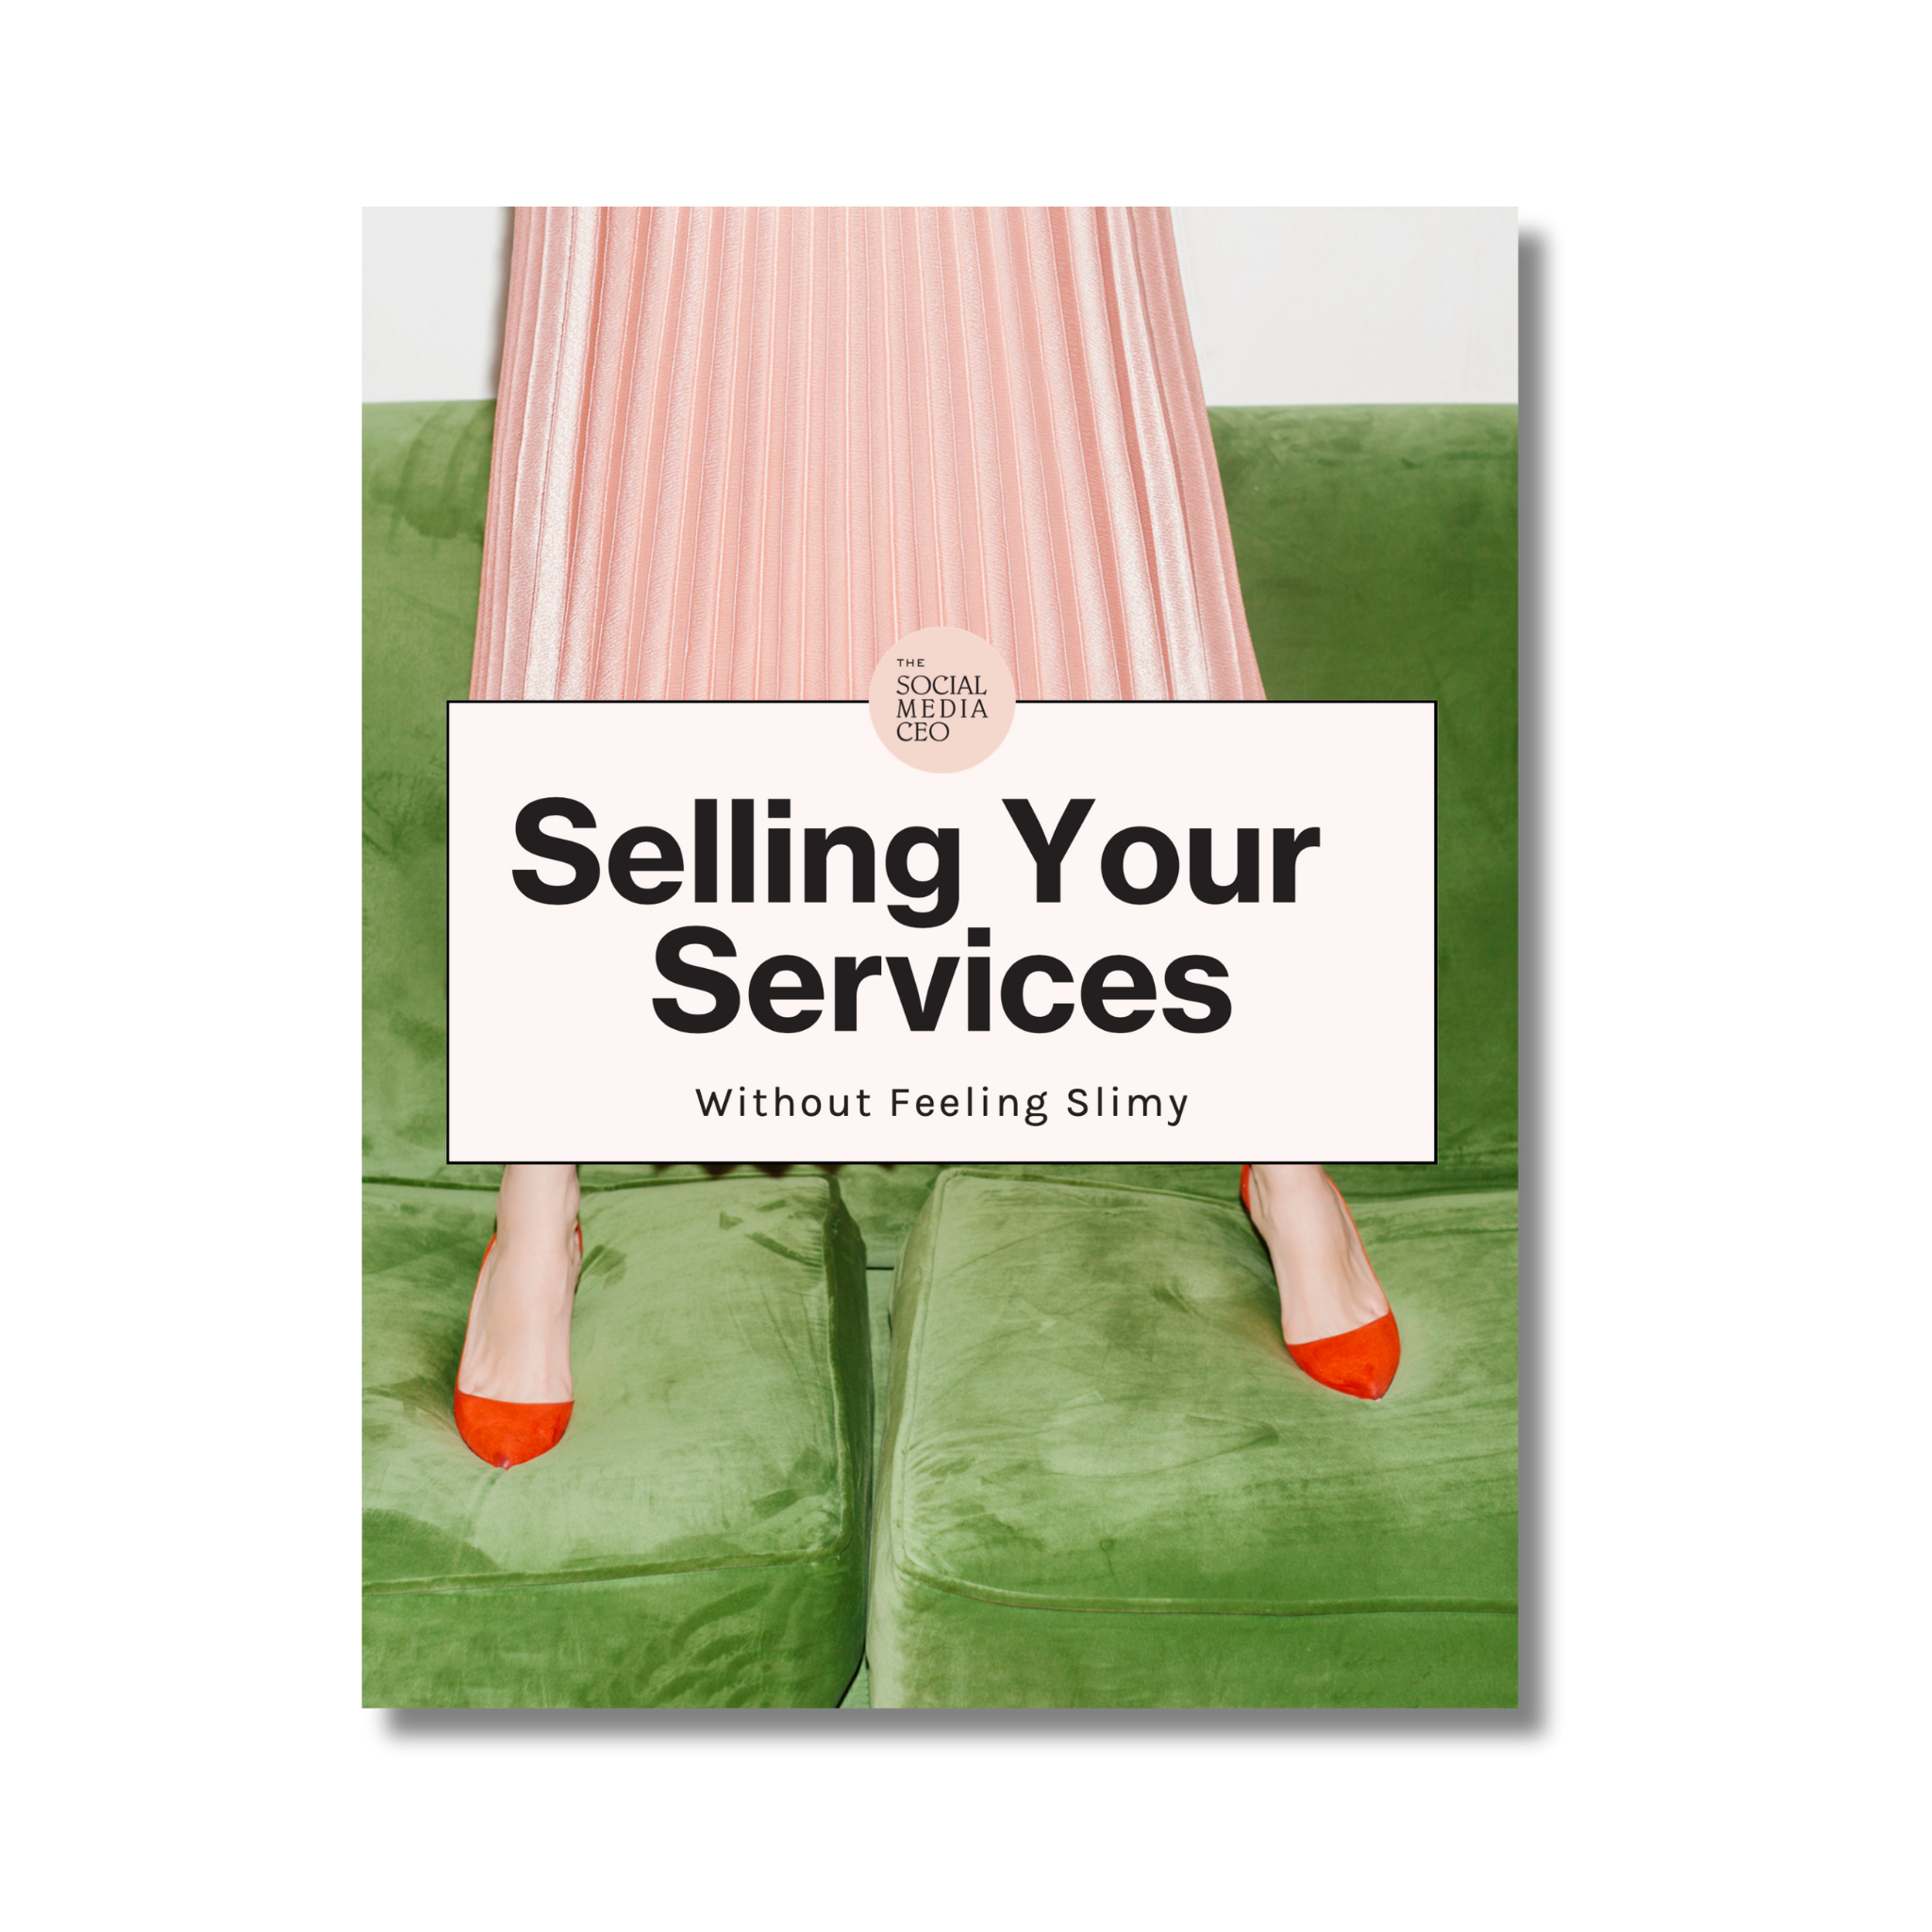 Selling Your Services (without Feeling Slimy) Workbook